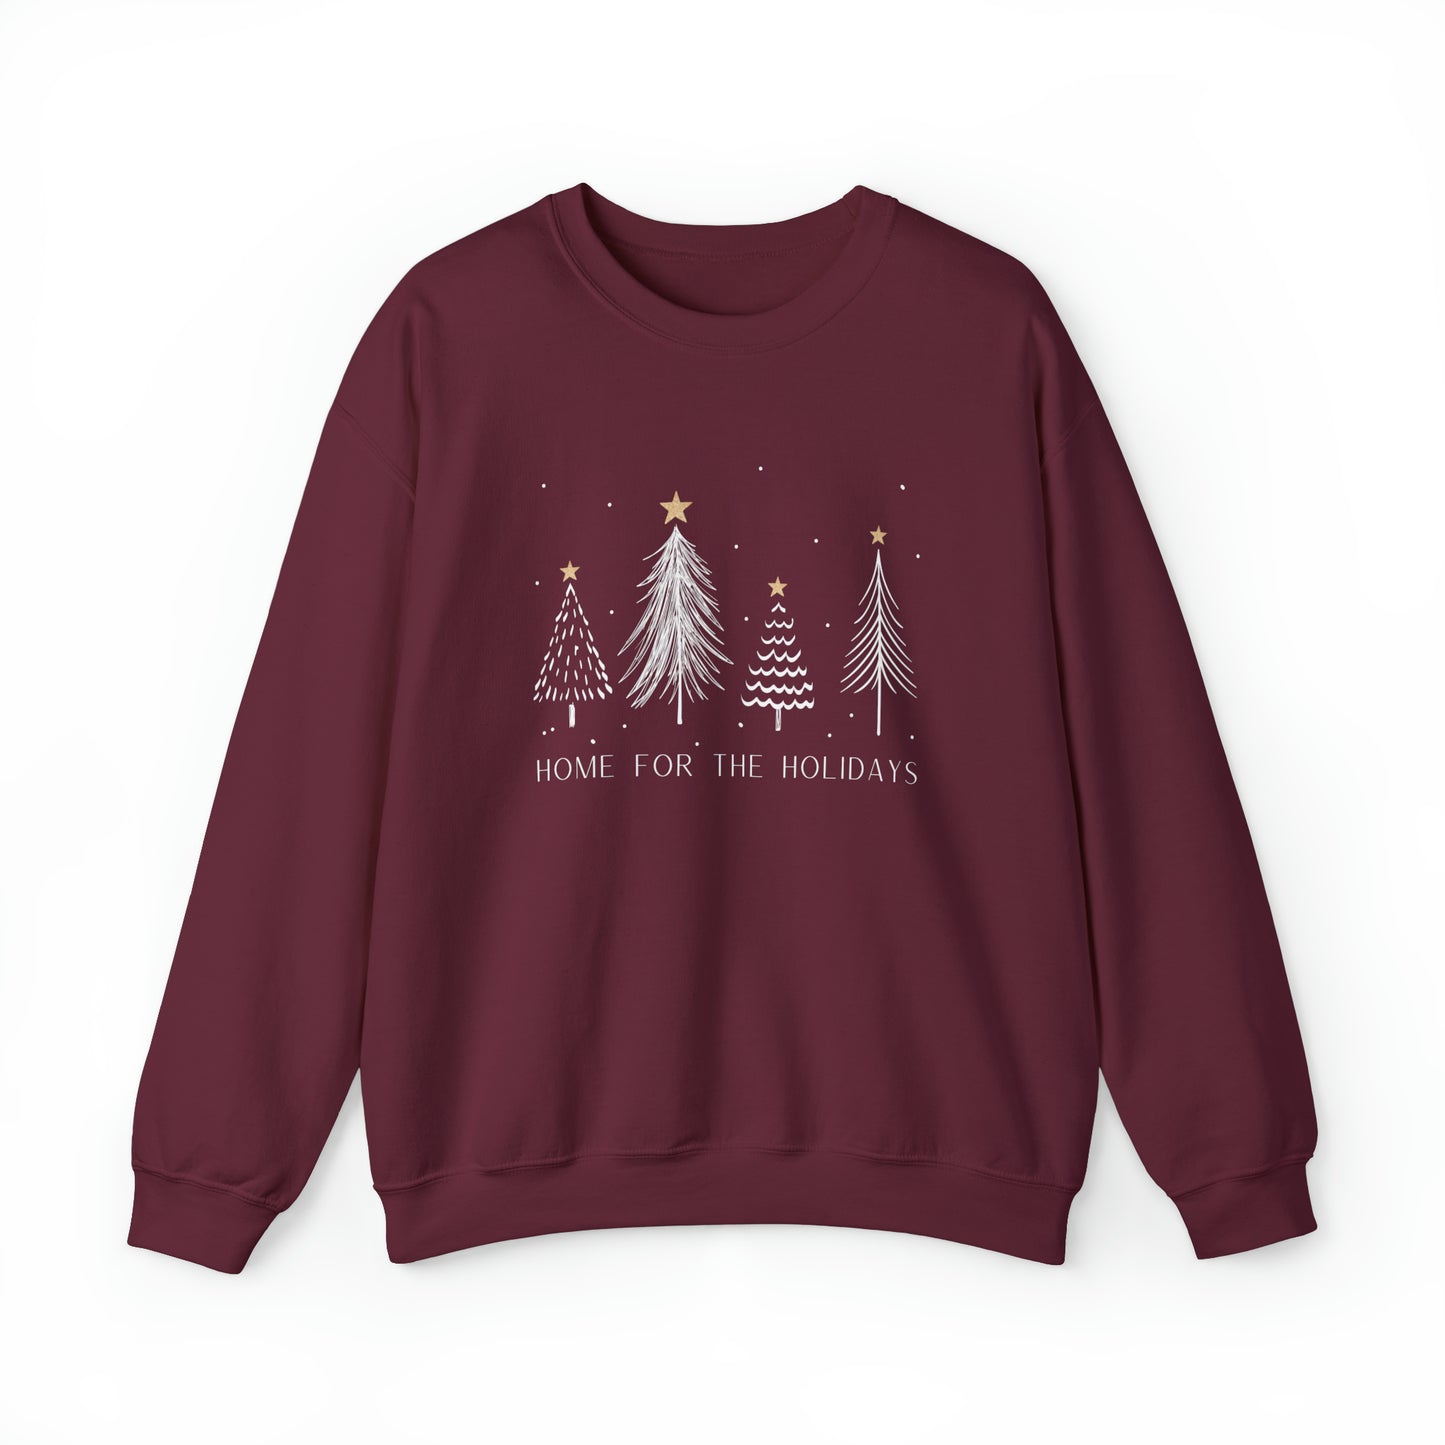 Home for the Holidays Christmas Sweatshirt, Simple Text